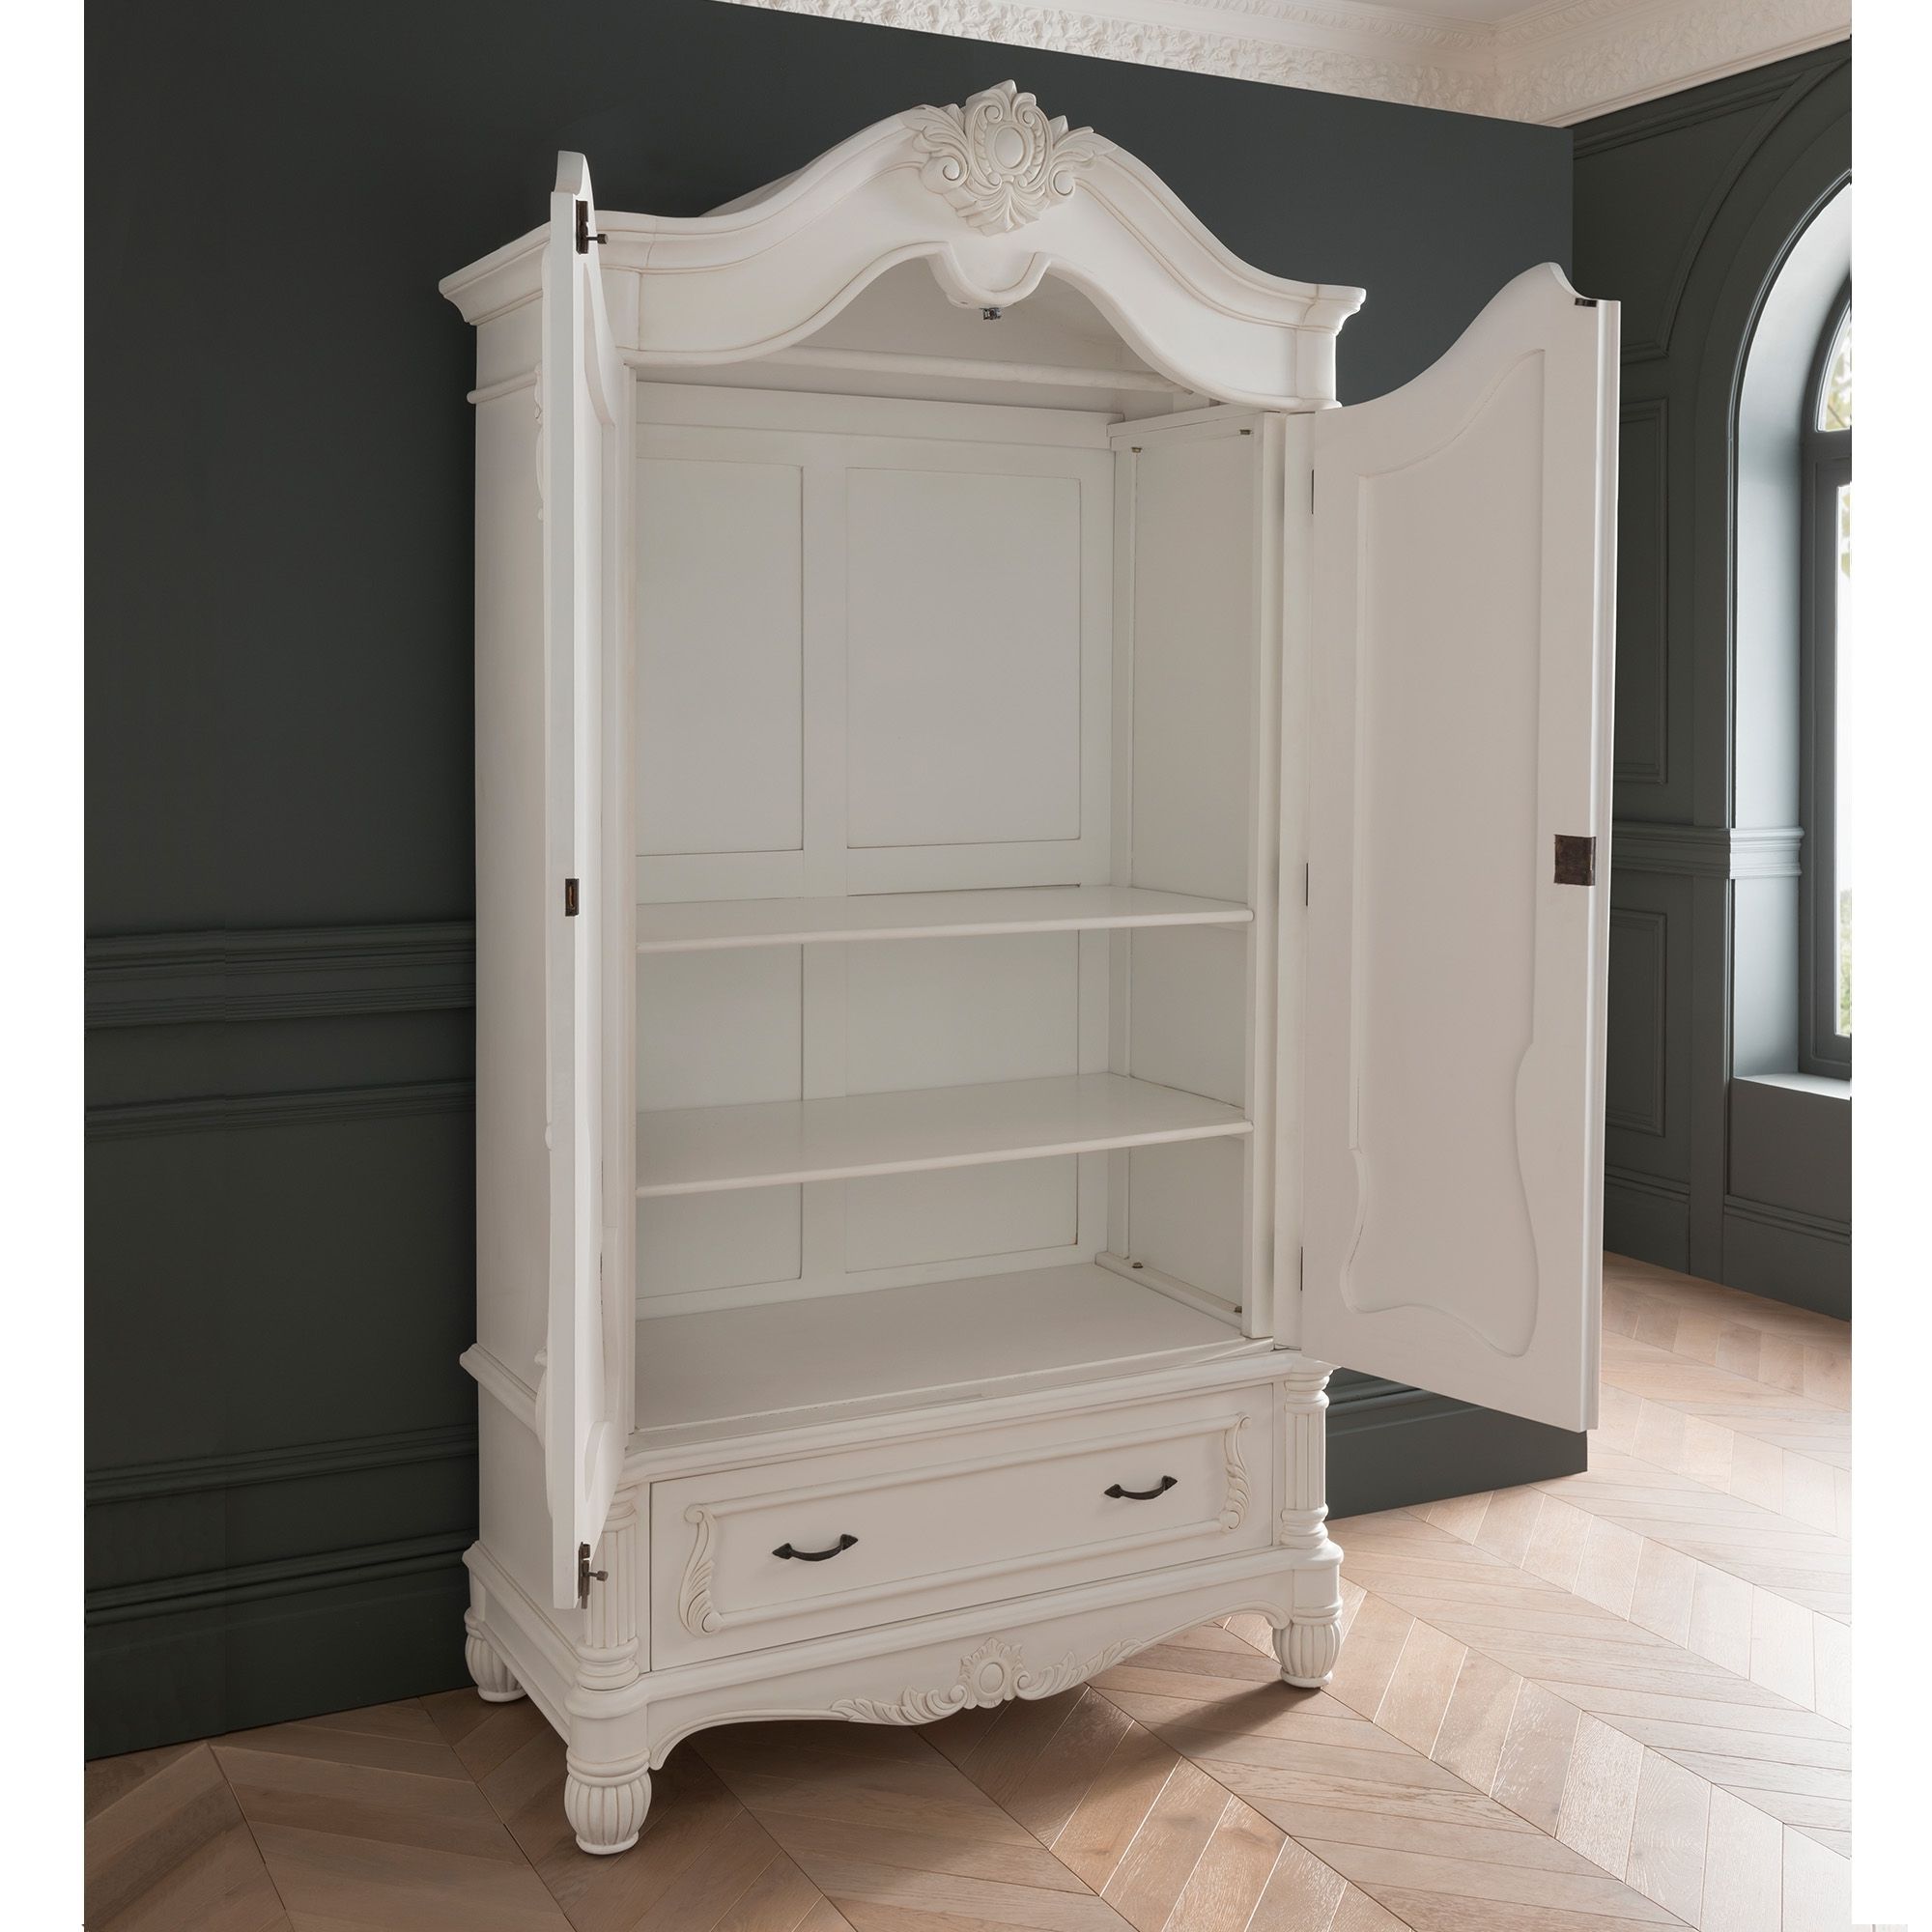 Antique French Style White Finished 1 Drawer Wardrobe | Homesdirect365 In Single French Wardrobes (View 6 of 20)